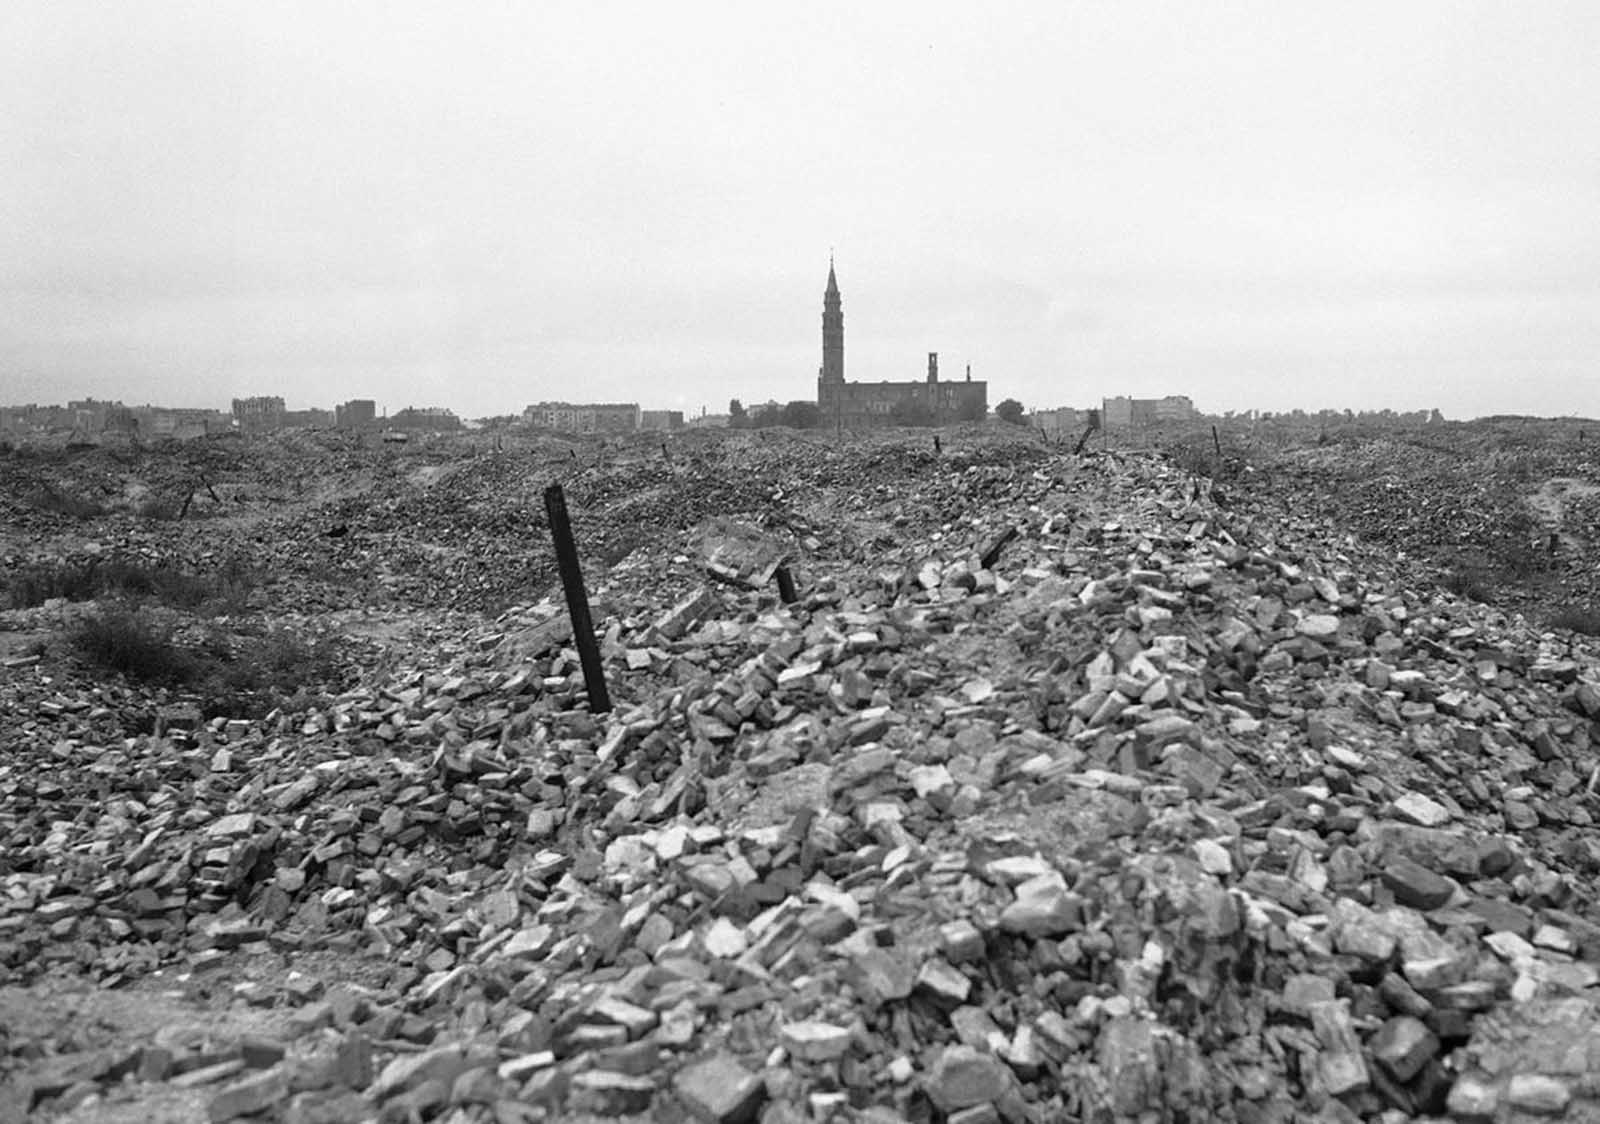 After the Warsaw Ghetto Uprising, the Ghetto was completely destroyed. Of the more than 56,000 Jews captured, about 7,000 were shot, and the remainder were deported to killing centers or concentration camps. This is a view of the remains of the ghetto, which the German SS dynamited to the ground. The Warsaw Ghetto only existed for a few years, and in that time, some 300,000 Polish Jews lost their lives there.